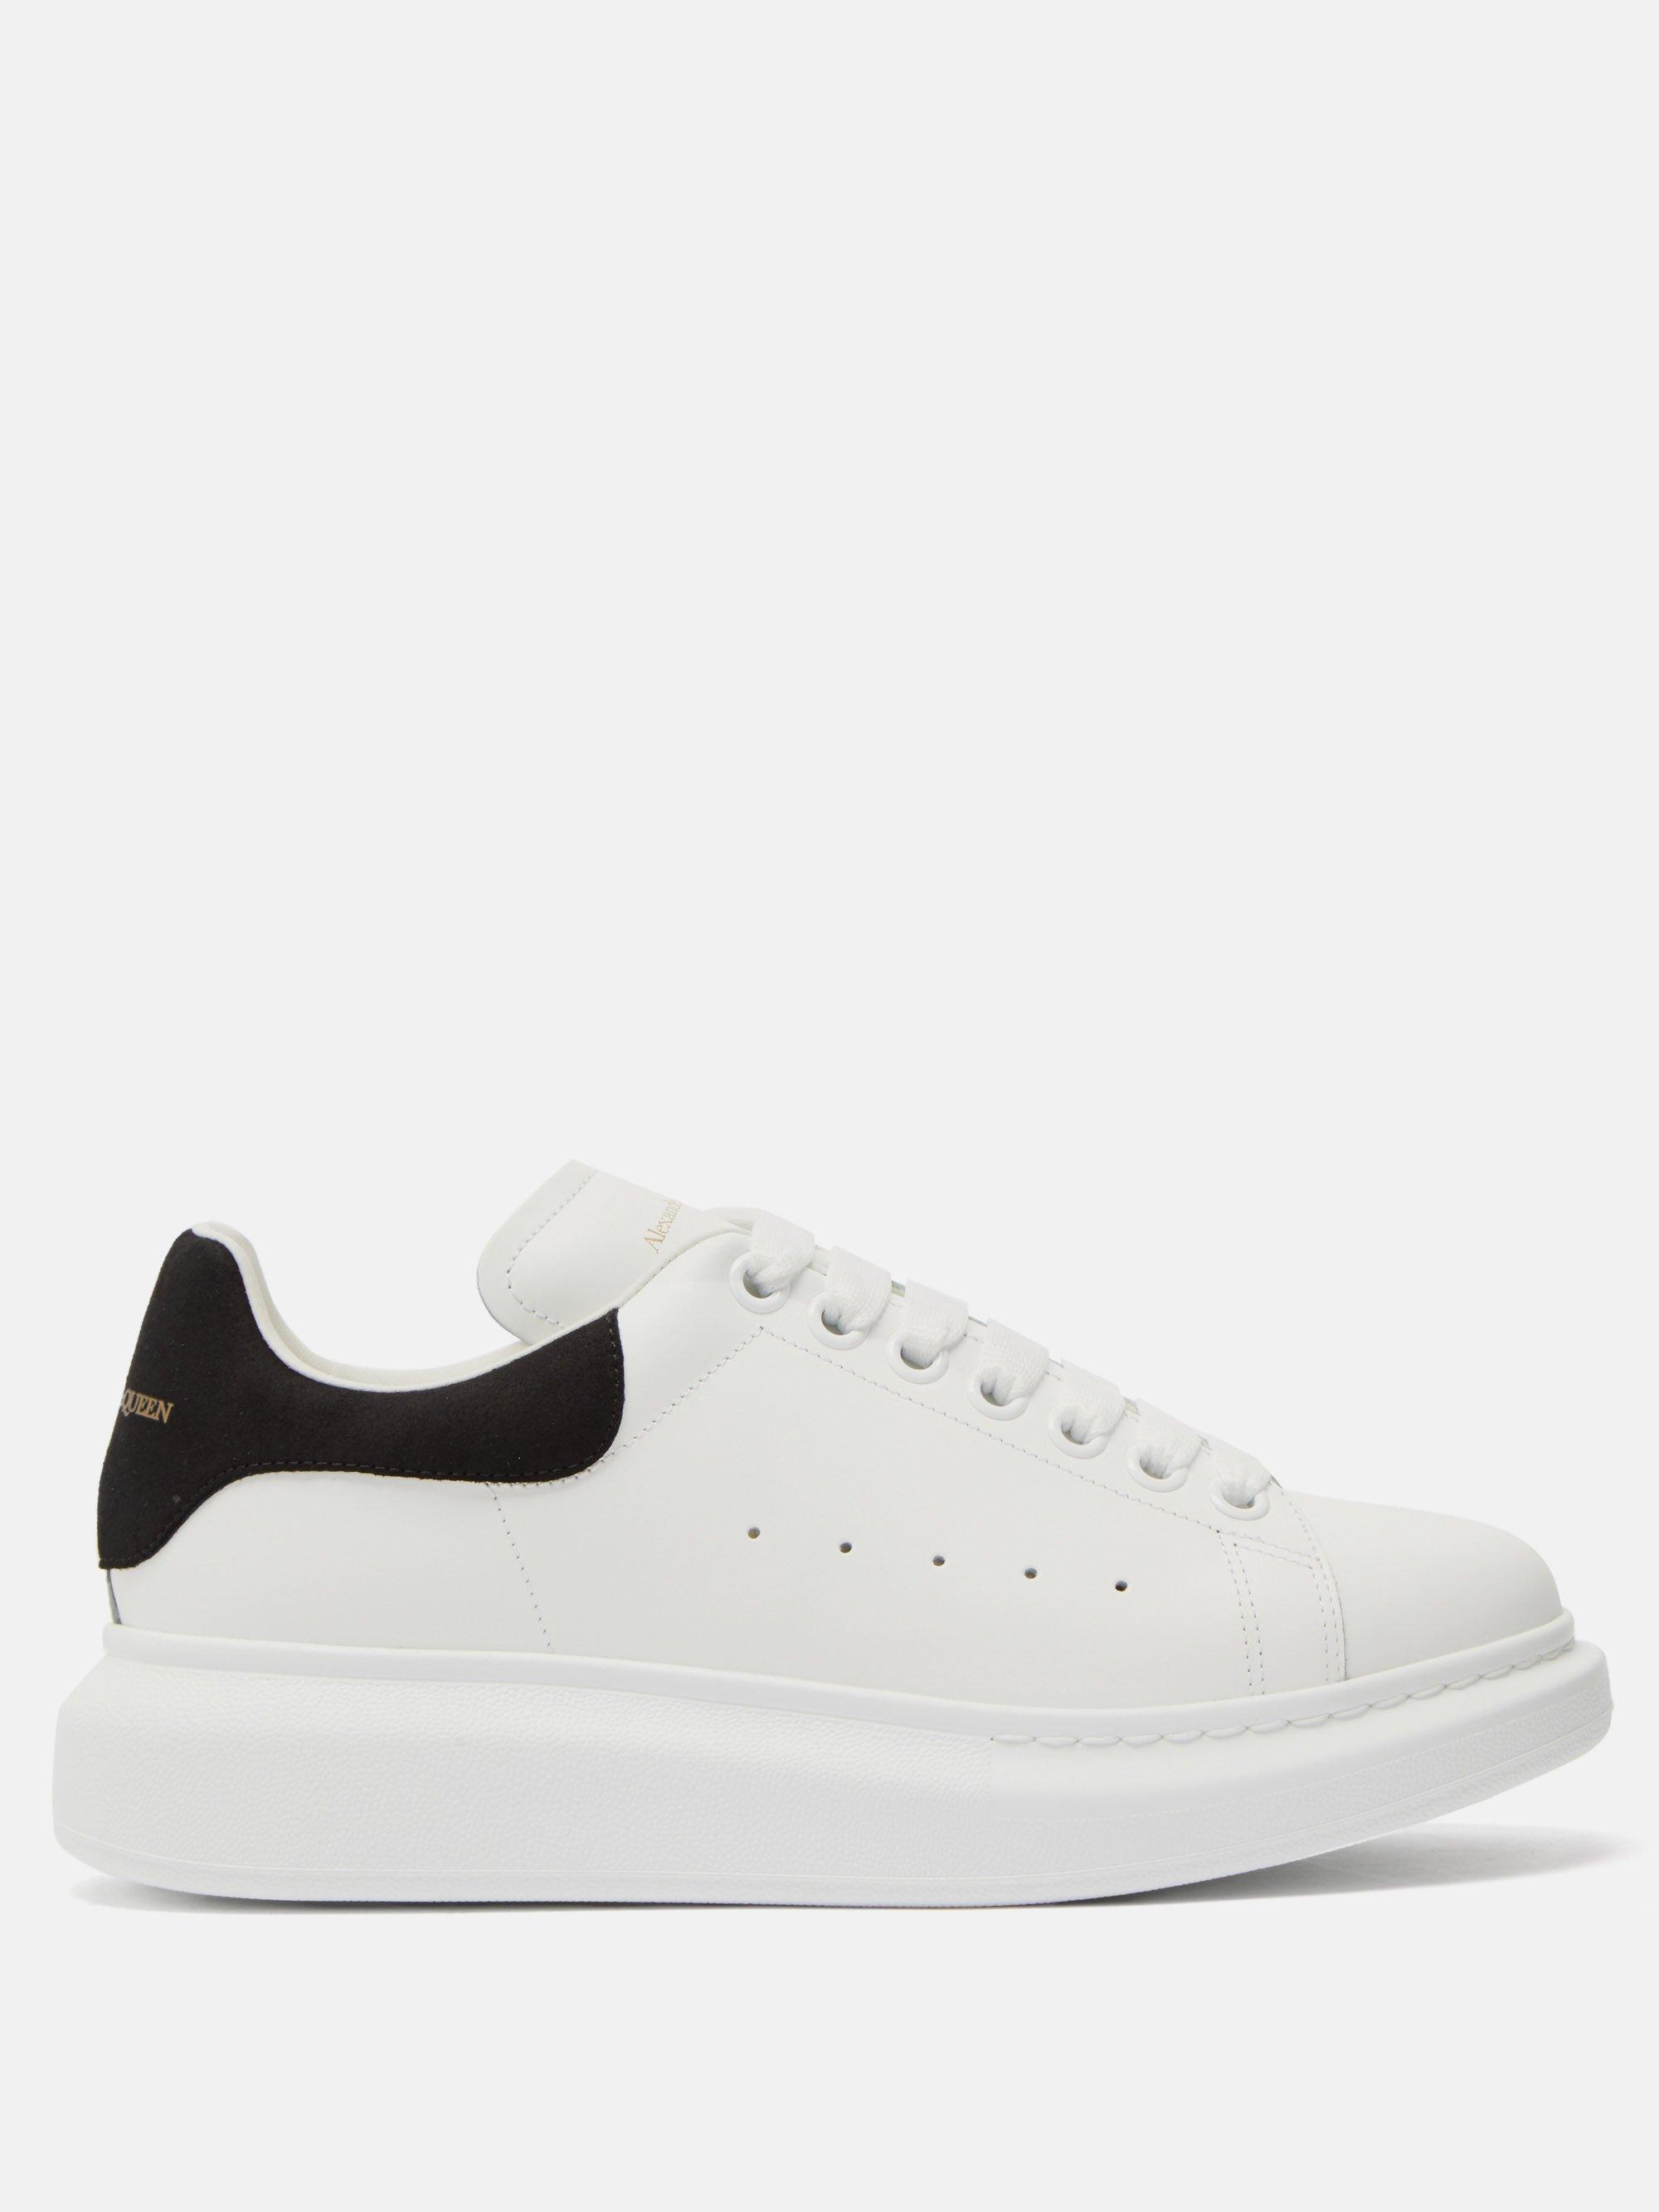 Alexander McQueen Oversize Sole Air Sneakers White,black Leather | Lyst